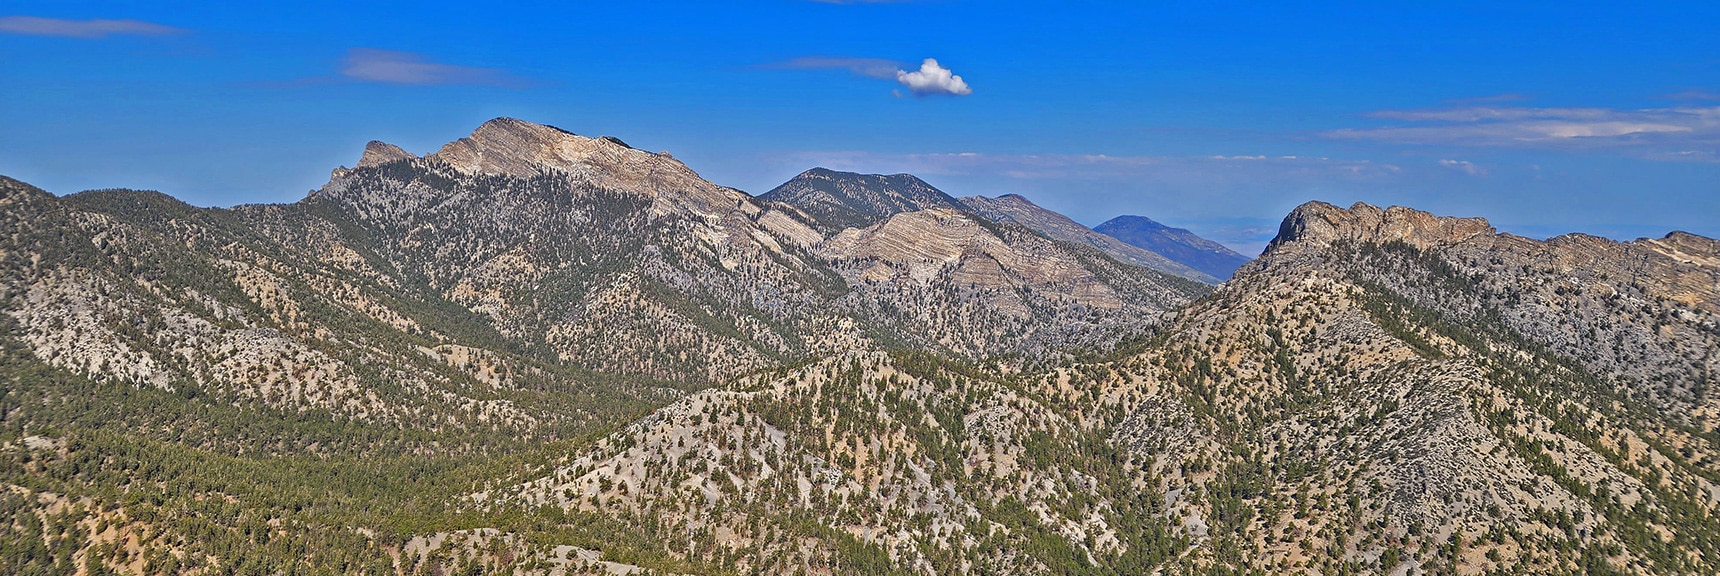 McFarland and Bonanza Peaks from Sisters North Summit | Sisters North | Lee Canyon | Mt Charleston Wilderness | Spring Mountains, Nevada